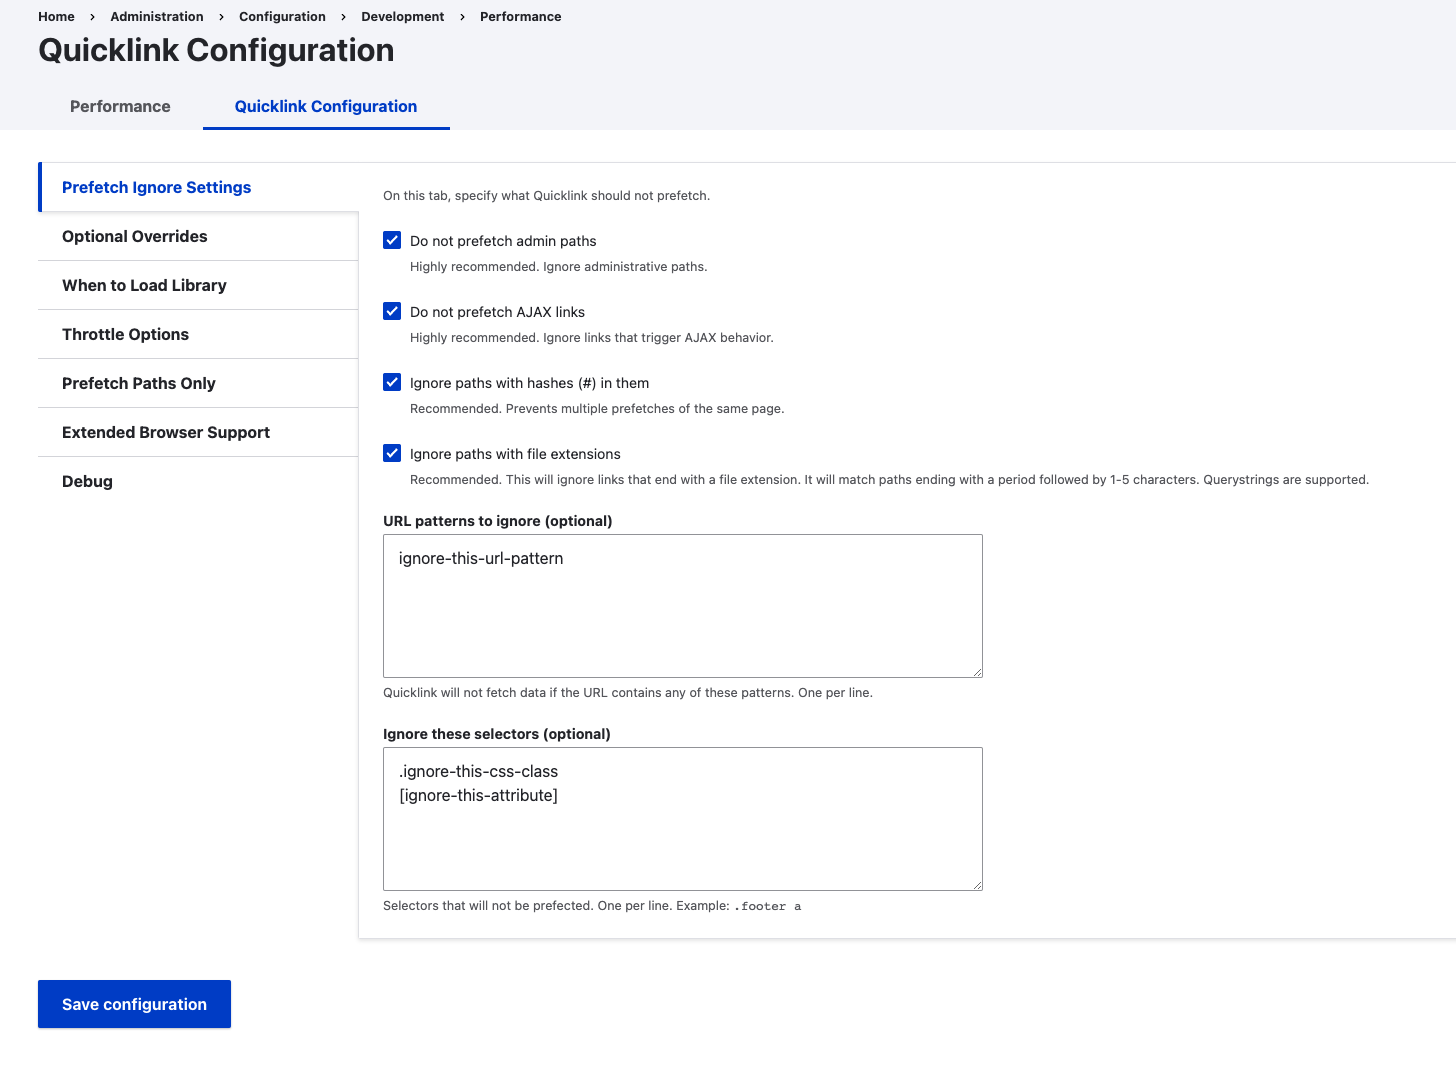 First tab of the Quicklink configuration form